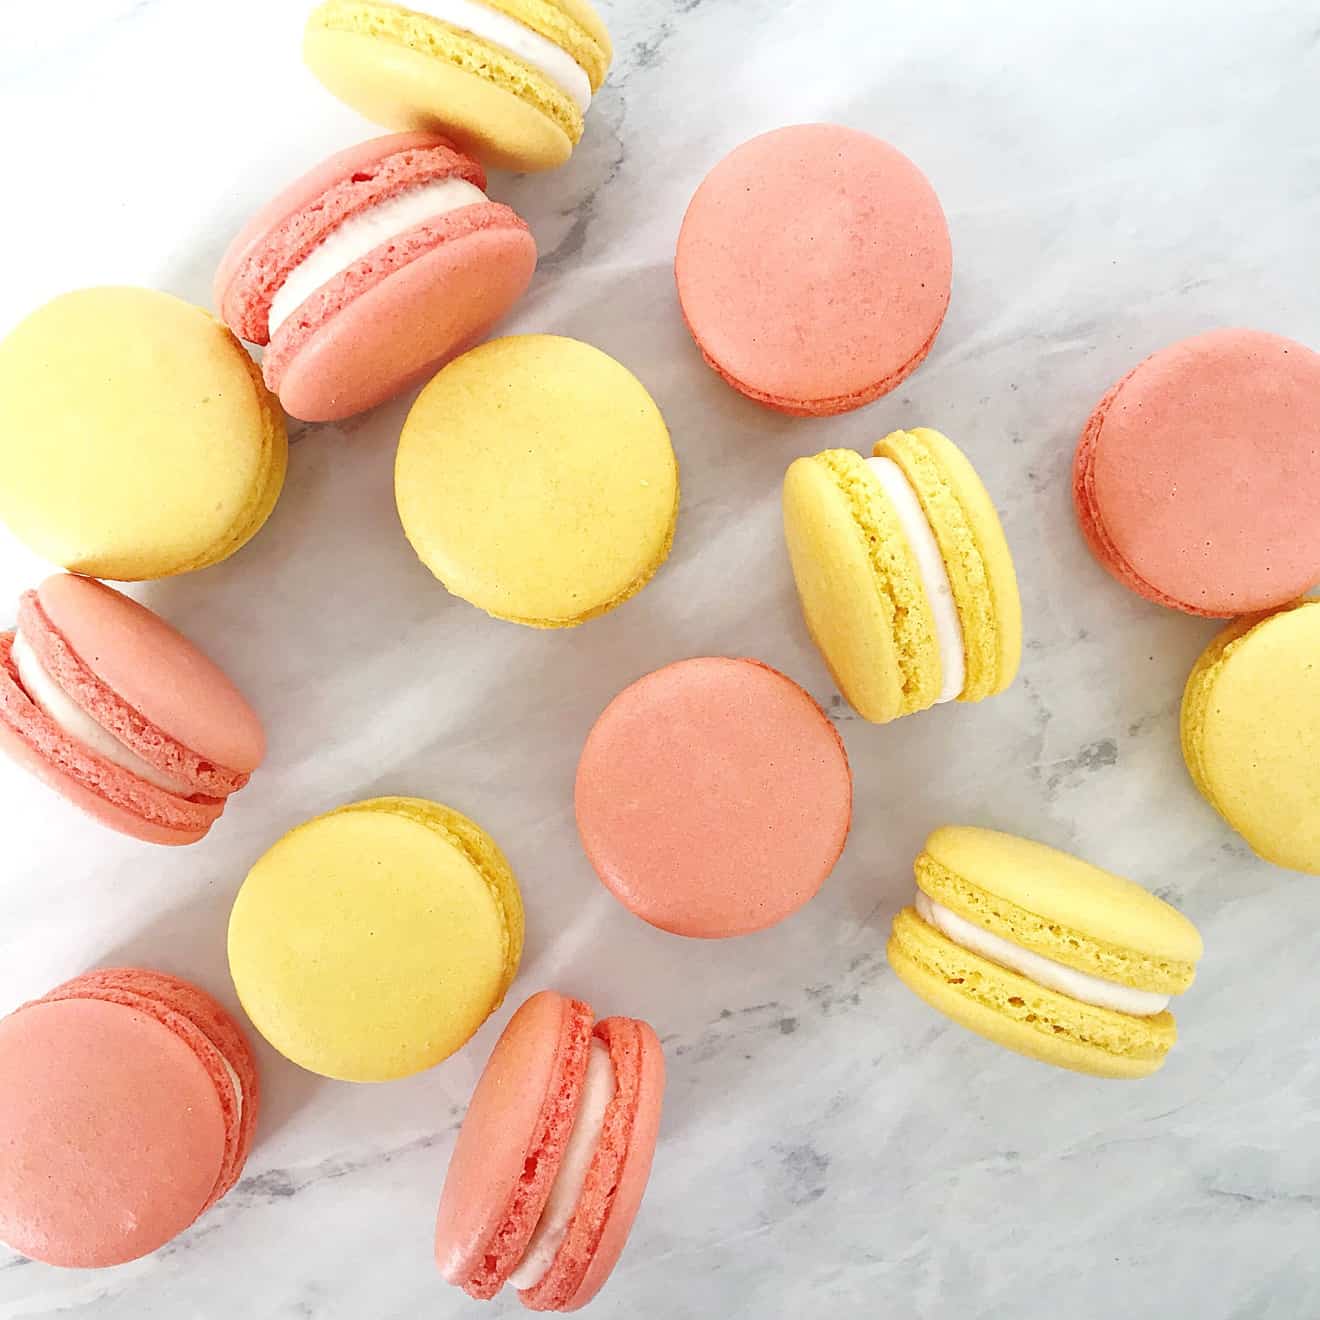 The Best Gluten Free French Macarons The Toasted Pine Nut,Lychee Fruit Benefits